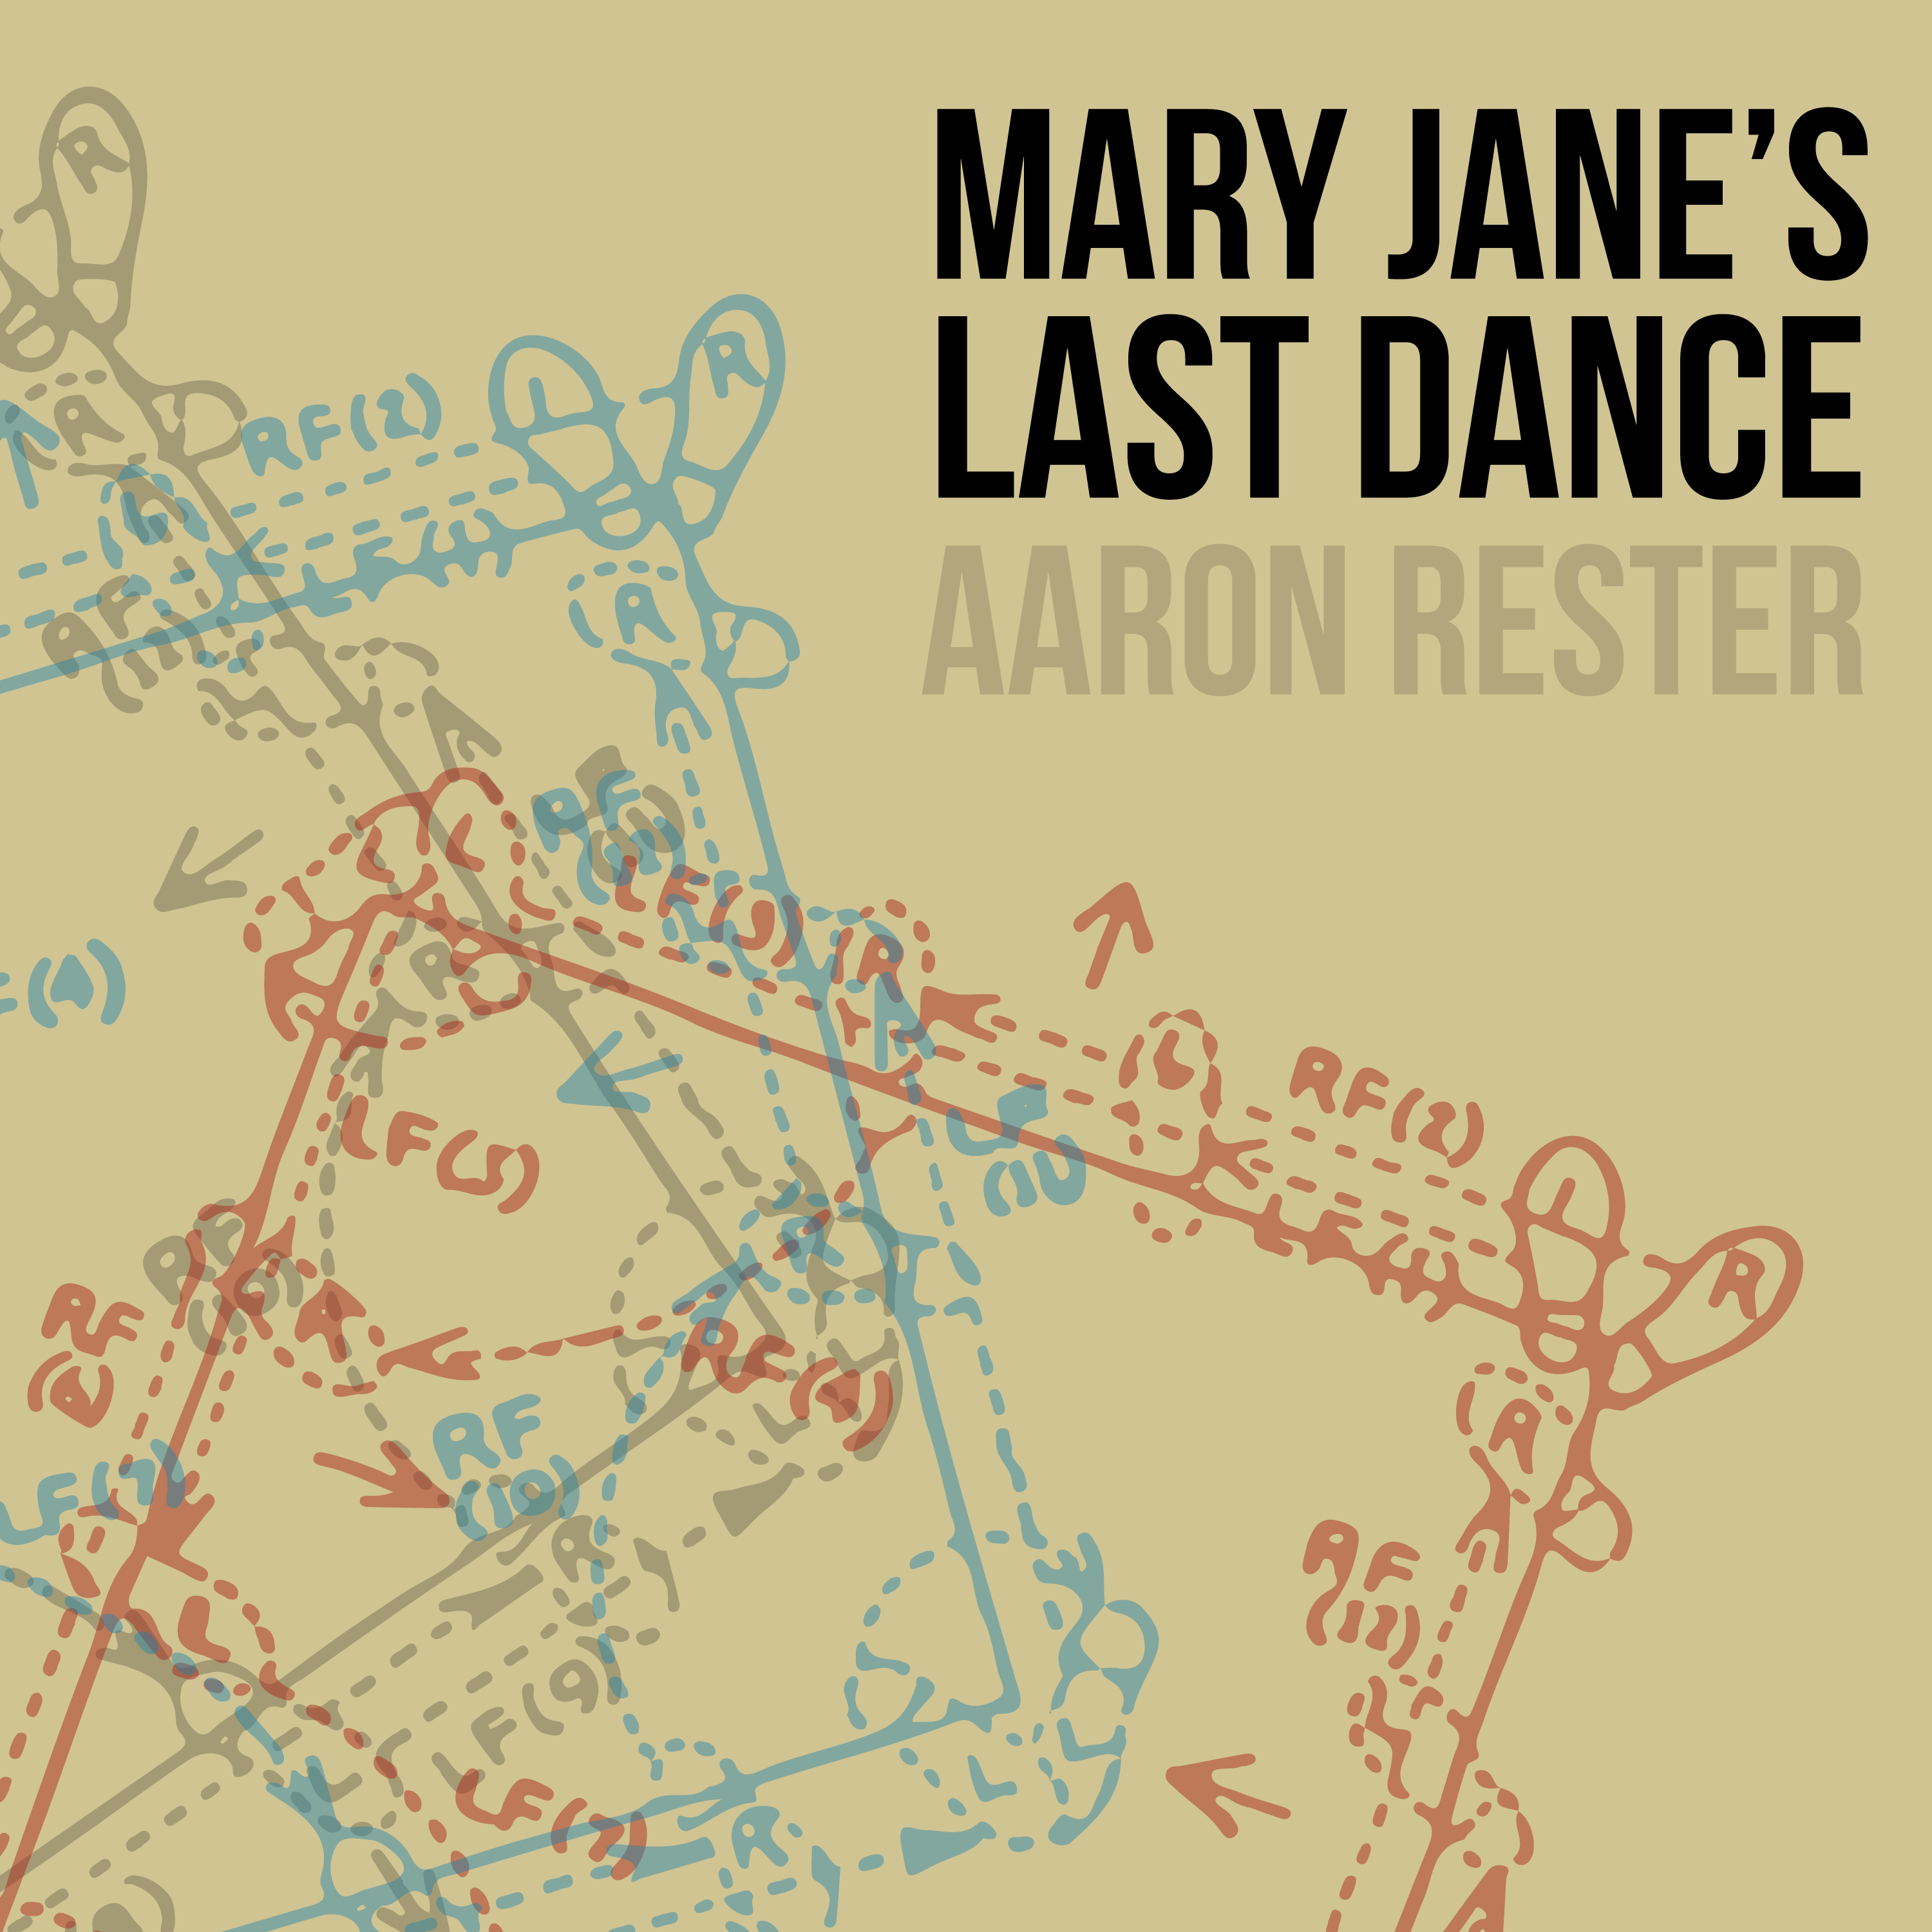 Mary Jane's Last Dance by Aaron Rester